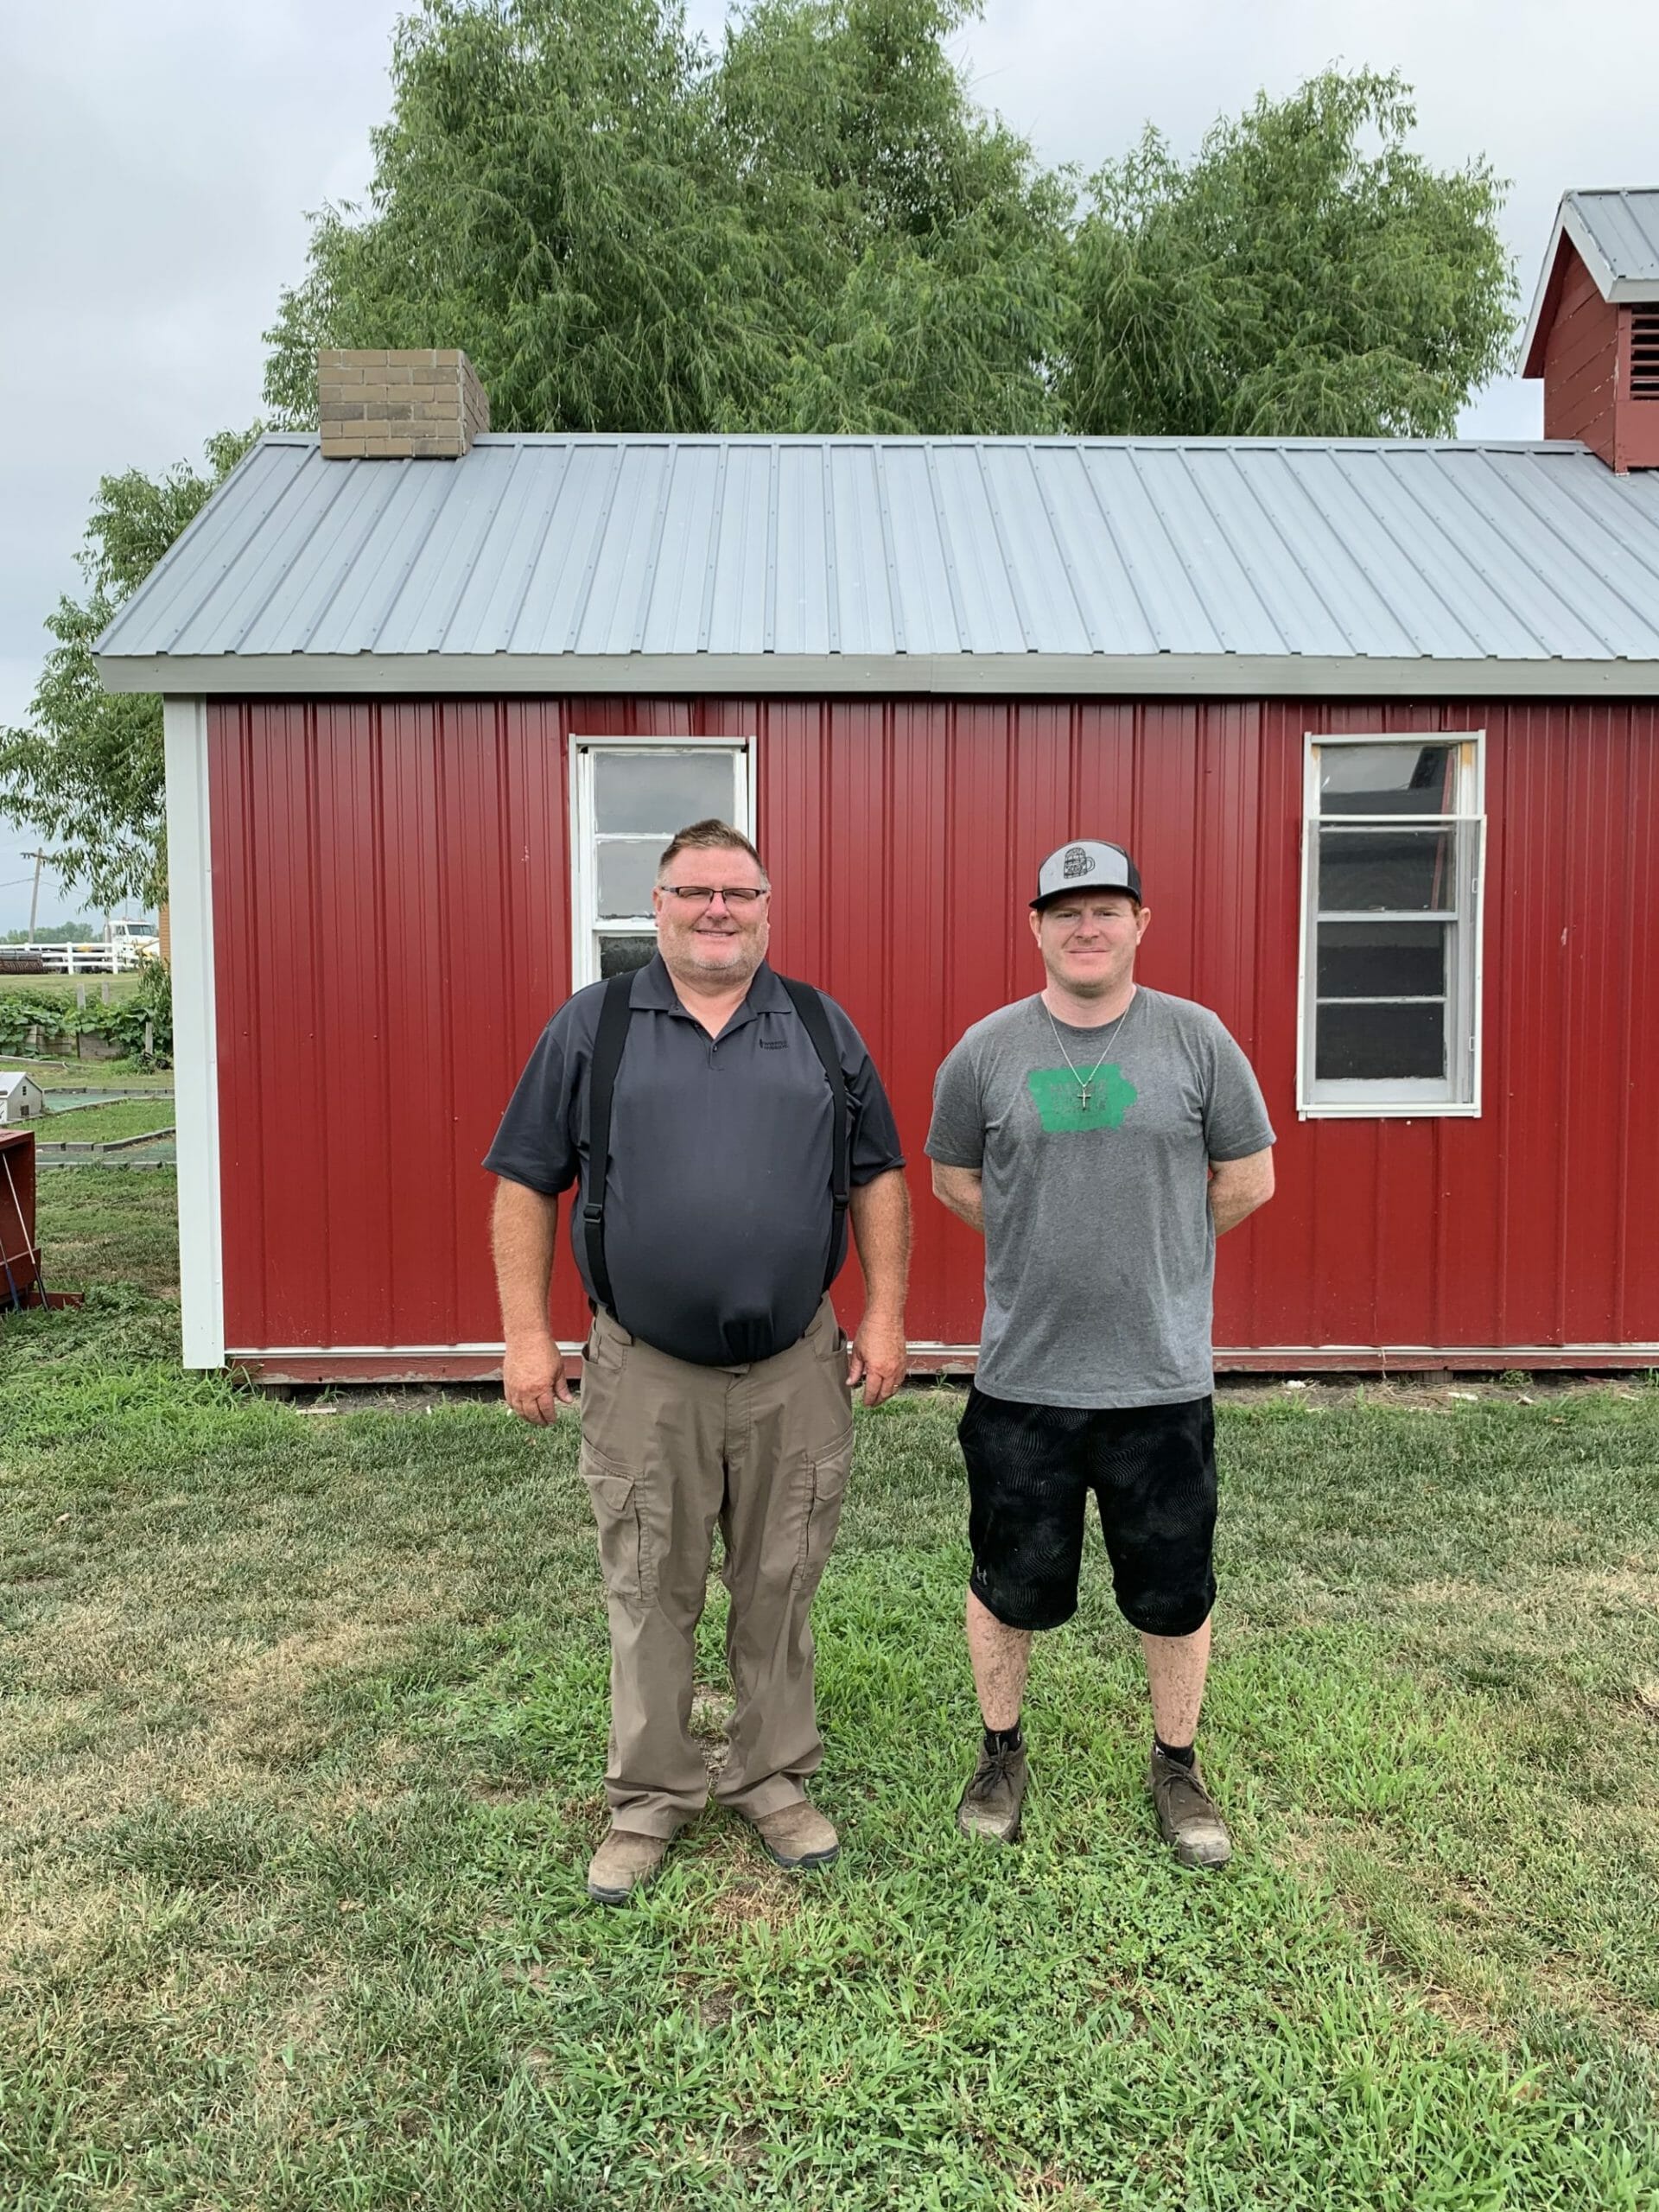 Lee Wisecup, left, and his son, Arthur Wisecup, are working together to expand cover crops and conservation on their fourth-generation family farm.